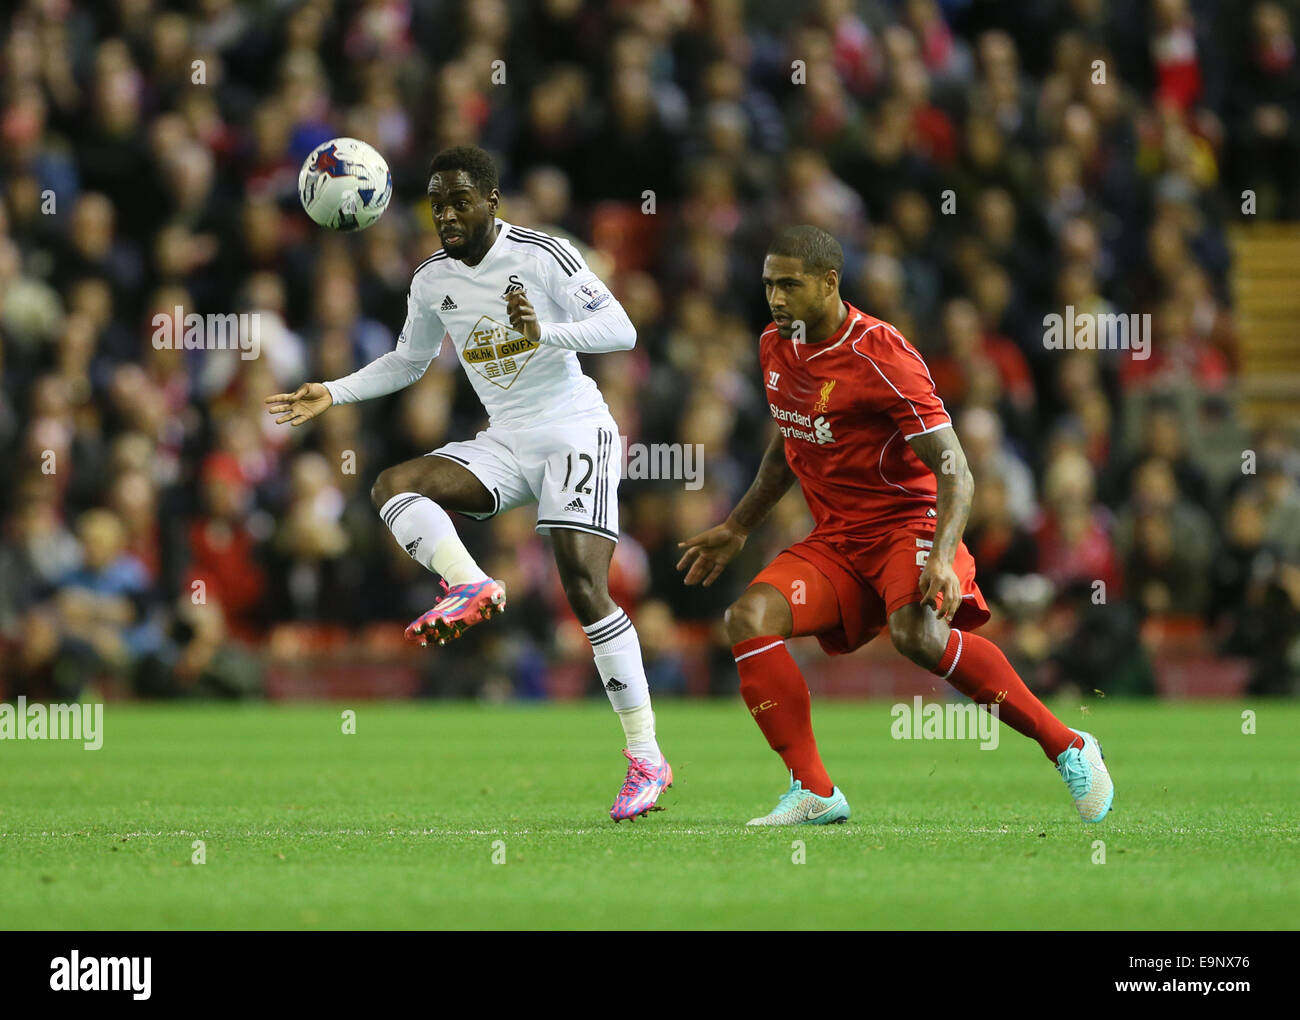 London, UK. 28th Oct, 2014. Liverpool's Glen Johnson tussles with Swansea's Nathan Dyer.League Cup Fourth Round- Liverpool vs Swansea City - Anfield - England - 28th October 2014 - Picture David Klein/Sportimage. © csm/Alamy Live News Stock Photo